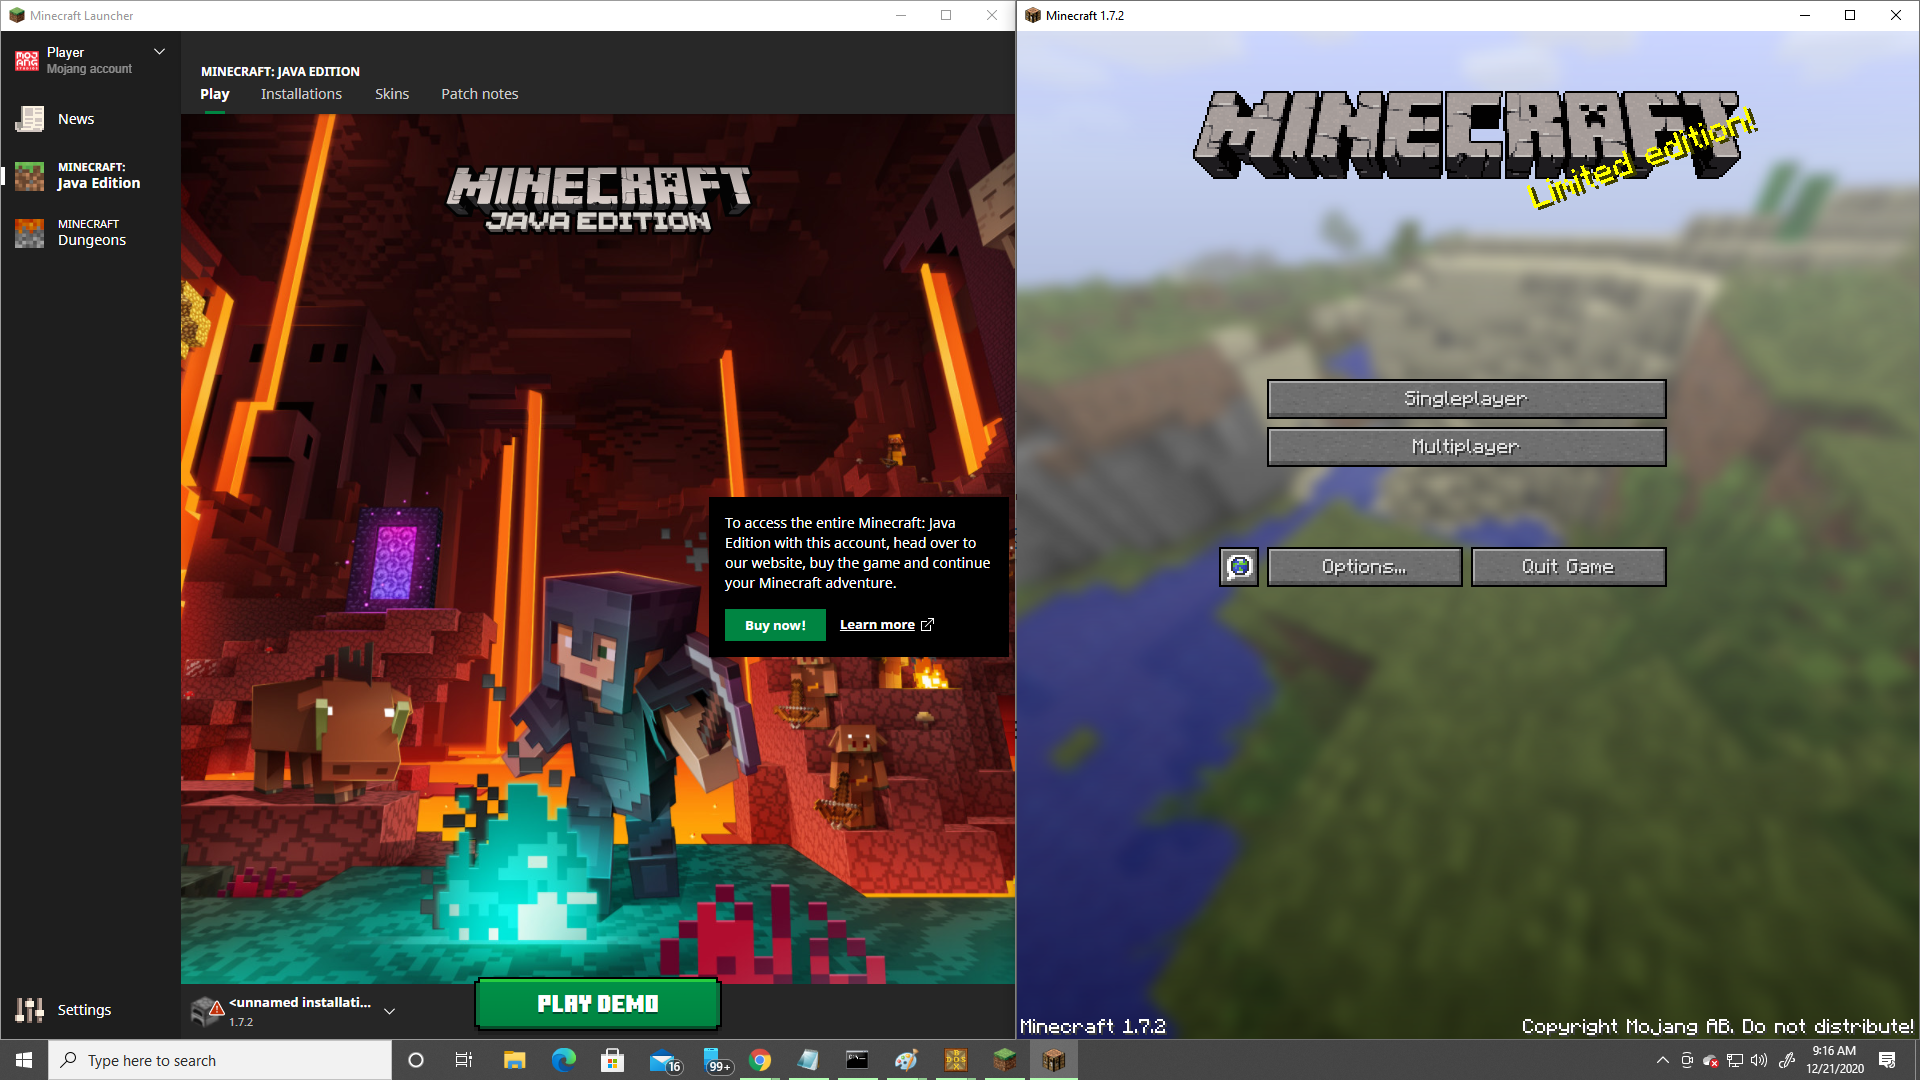 Why Does Minecraft 1 7 1 7 2 Run Without Demo Mode On A Demo Account Discussion Minecraft Java Edition Minecraft Forum Minecraft Forum